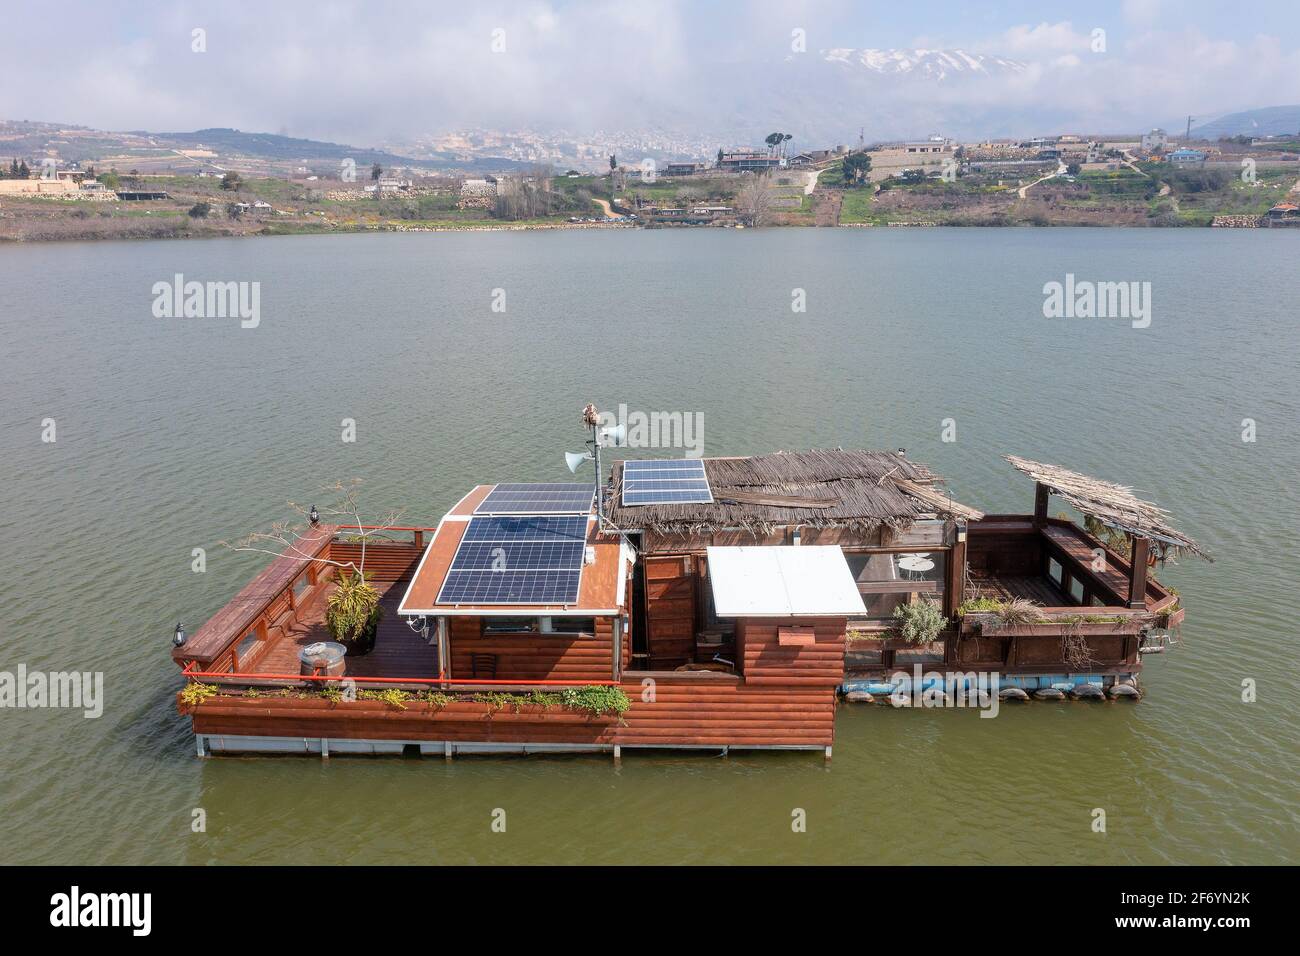 Self Sufficient floating house with solar panels, Aerial view. Stock Photo